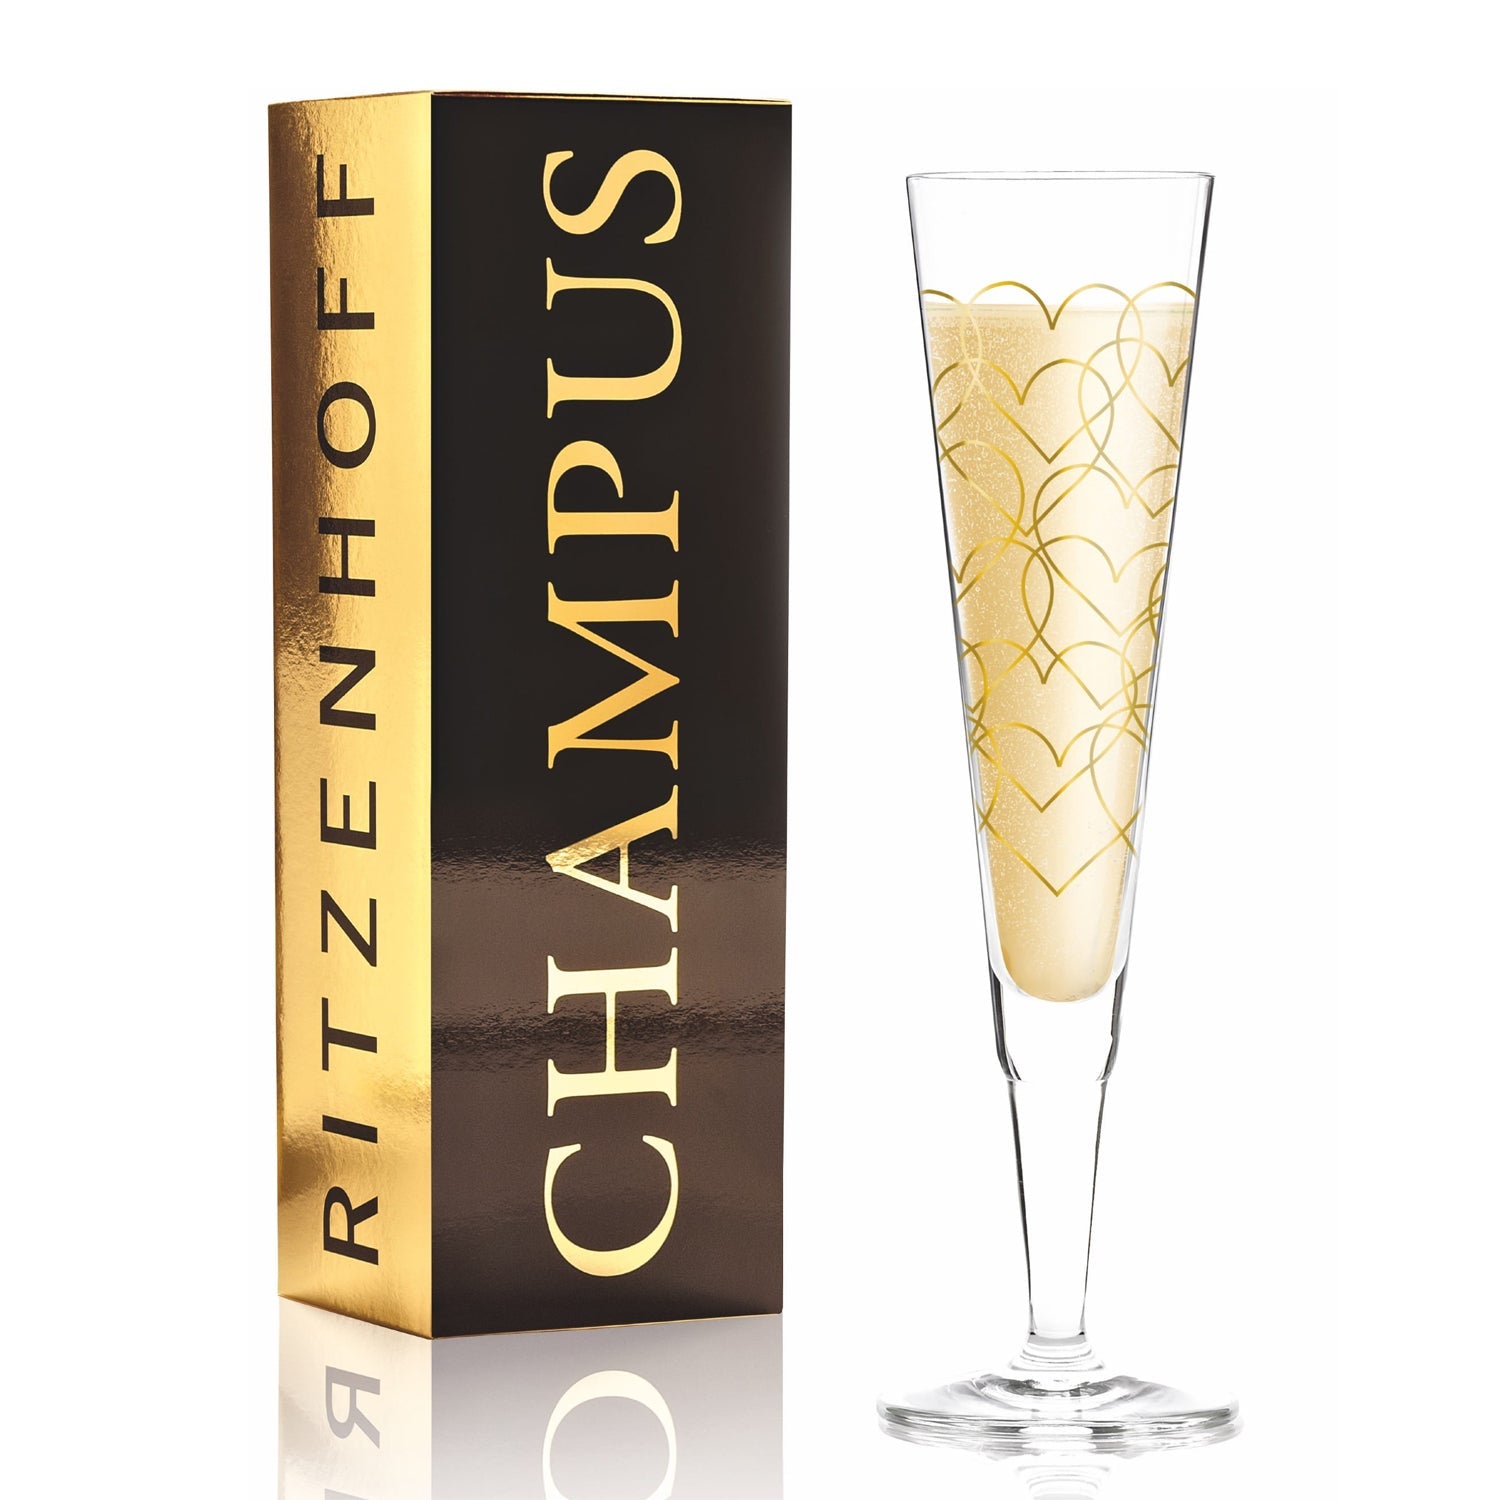 CHAMPAGNE GLASS GOLDEN HEARTS